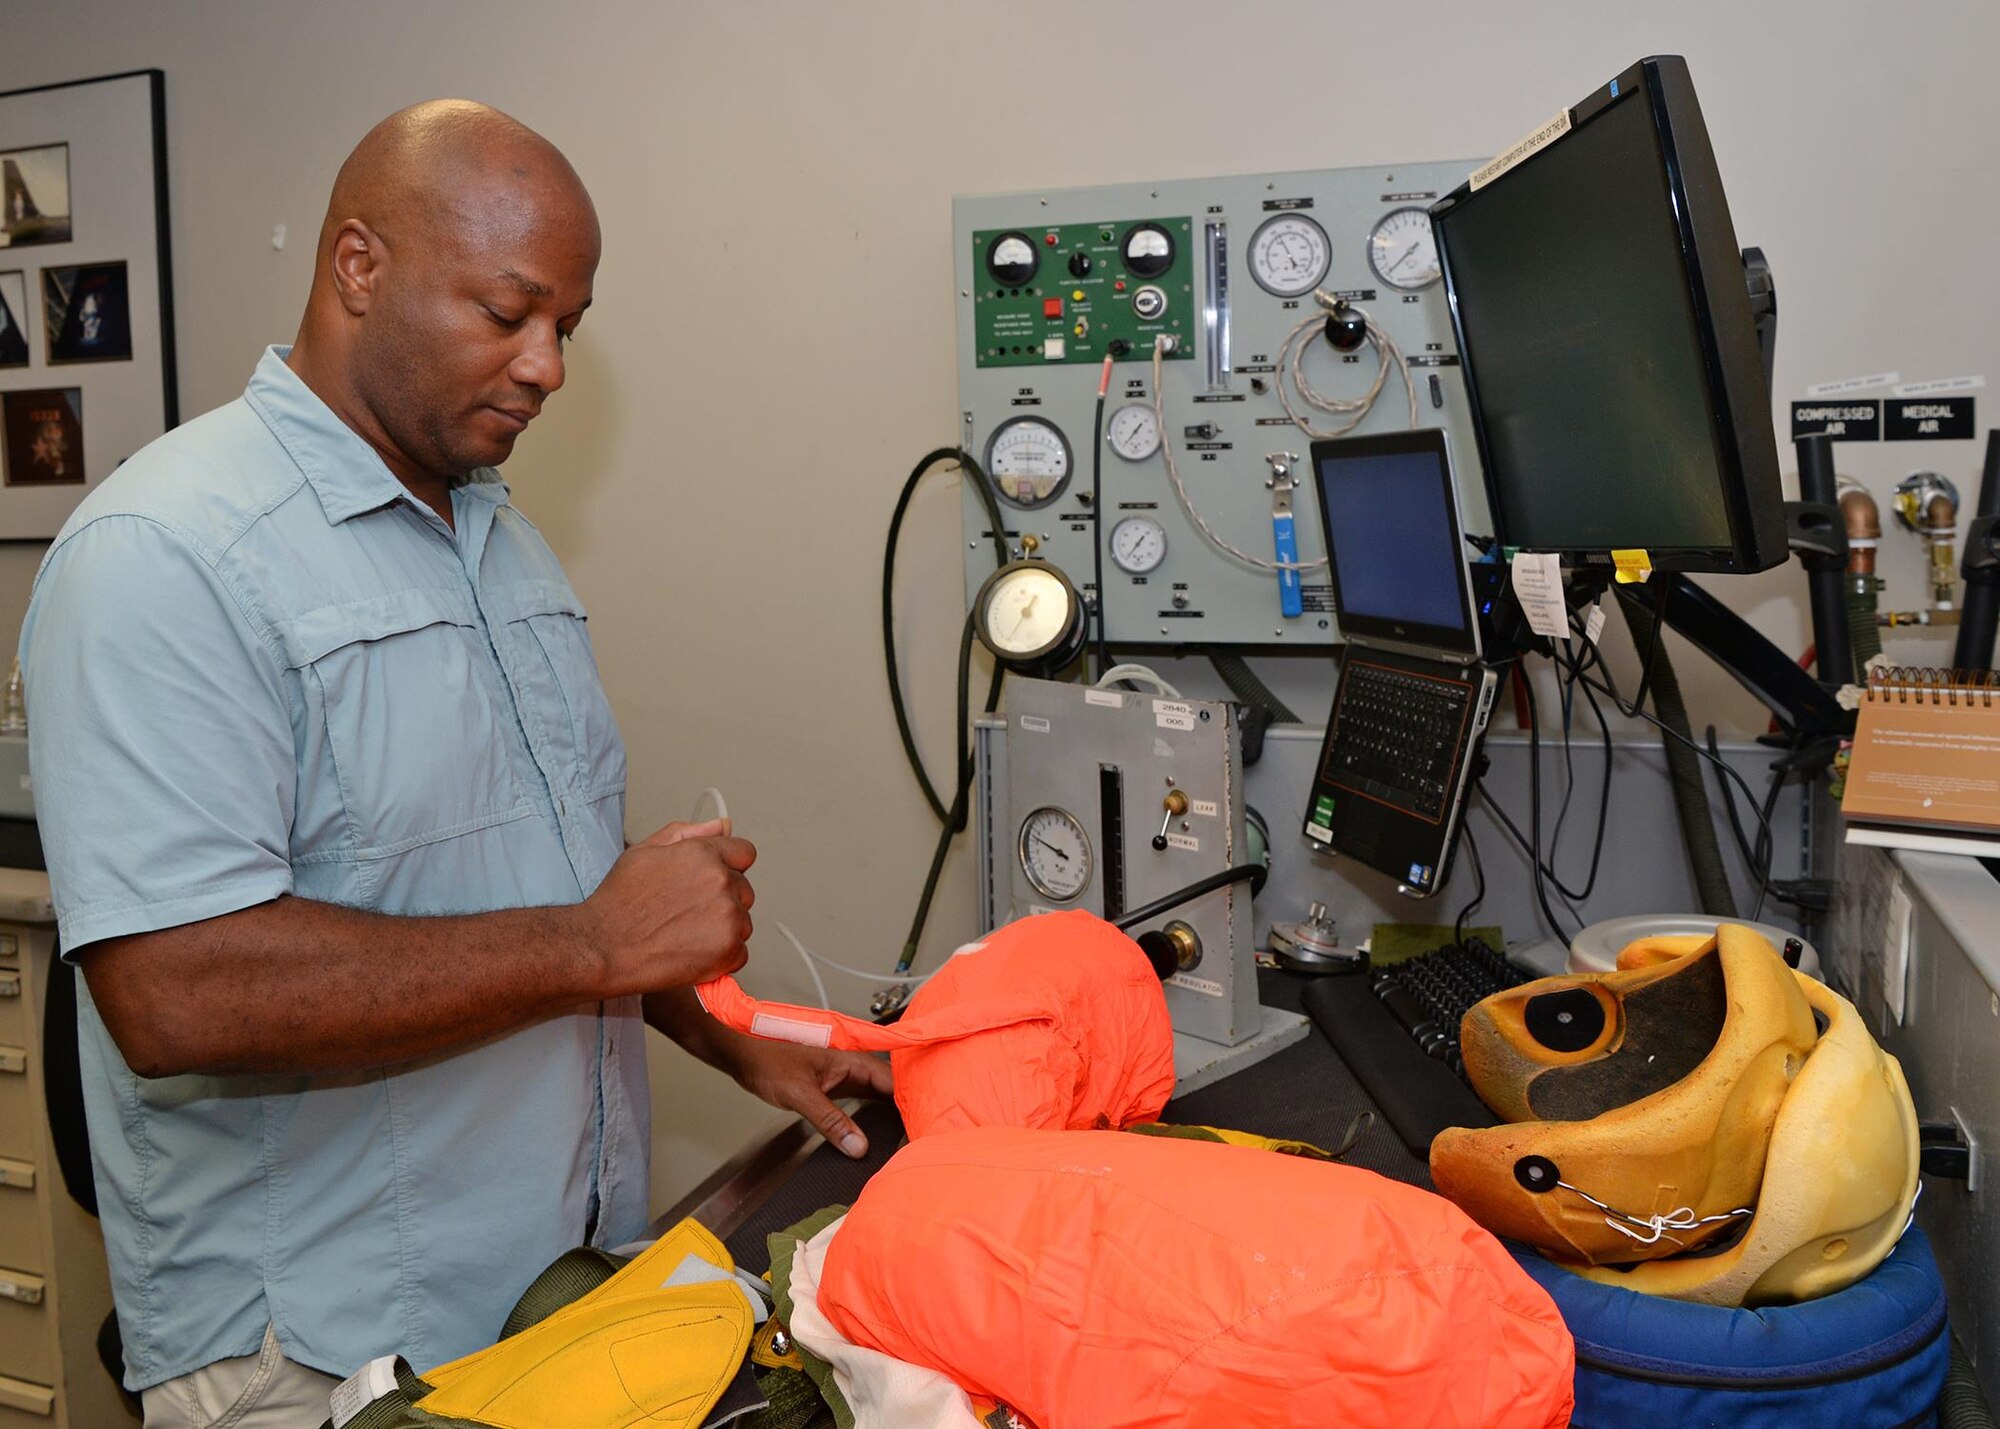 Harold R. Washington, 9th Physiological Support Squadron suit maintenance technician, inflates the life preserve device of a full pressure suit Aug. 31, 2016, at Beale Air Force Base, California. In the event of a crash the life preserve device is designed to inflate upon contact with water. (U.S. Air Force photo/Airman Tristan D. Viglianco)